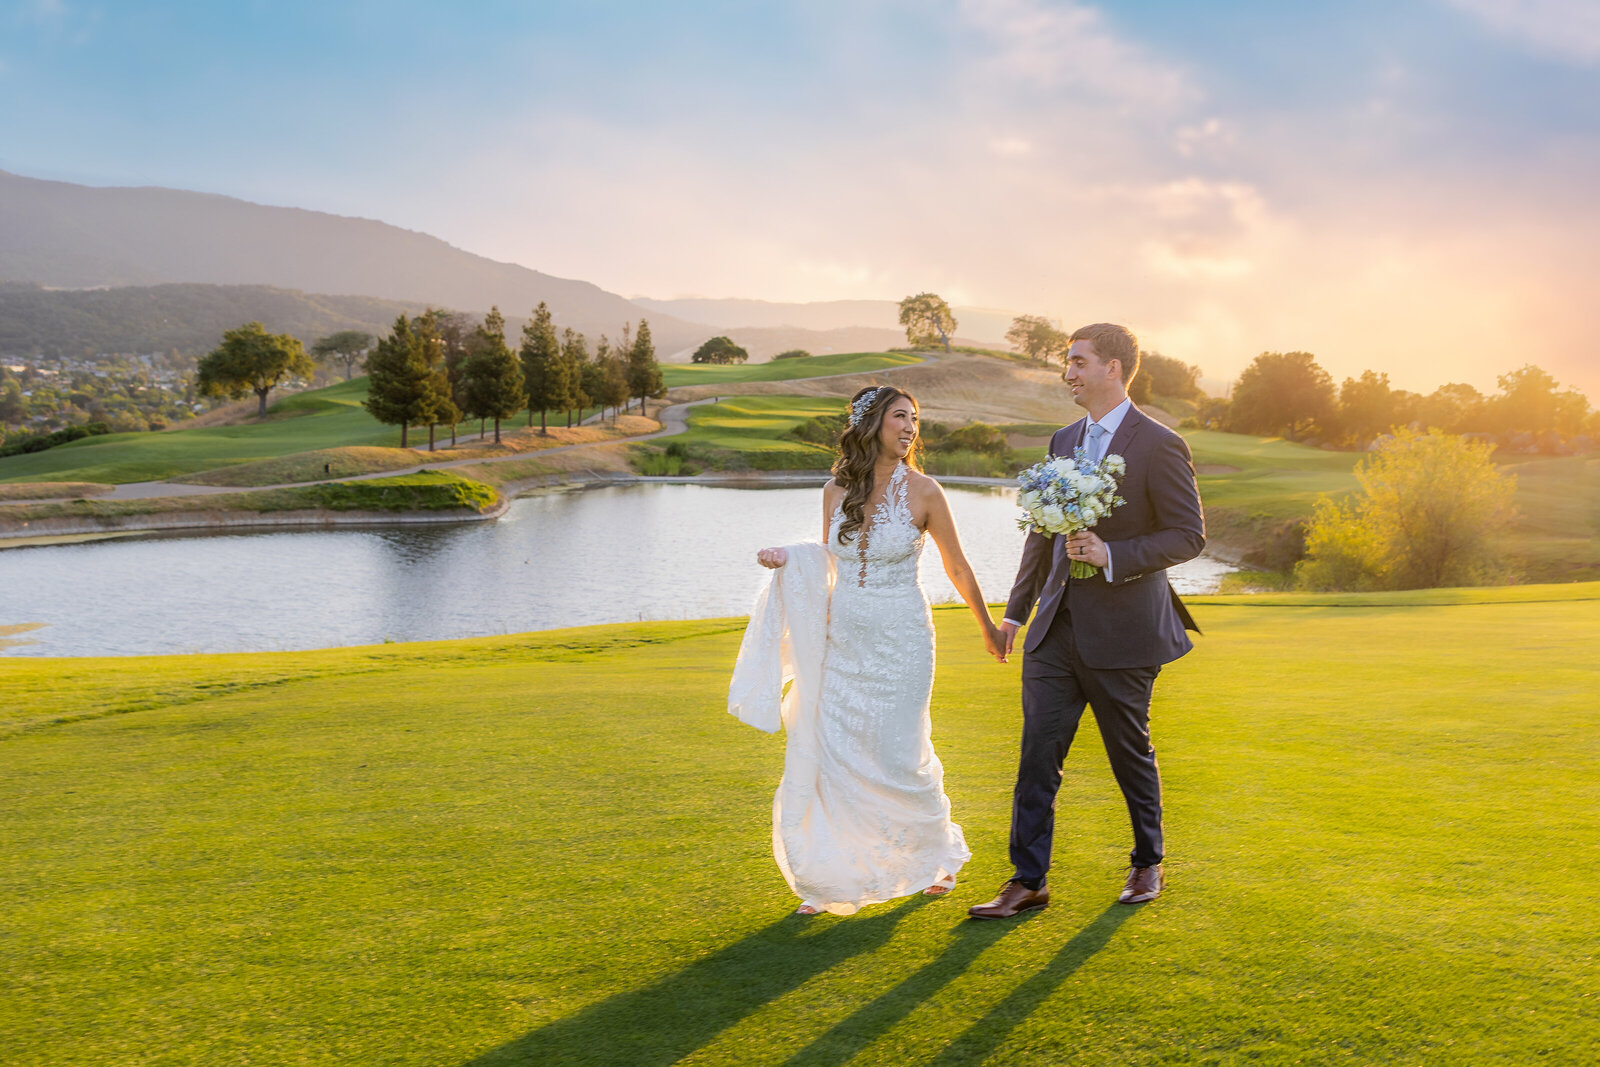 Bride and Groom hold hands as they walk on a golf course with lake in the background and sunset. They look at each other lovingly.  Photo by wedding photographer in Sacramento, Philippe Studio Pro.